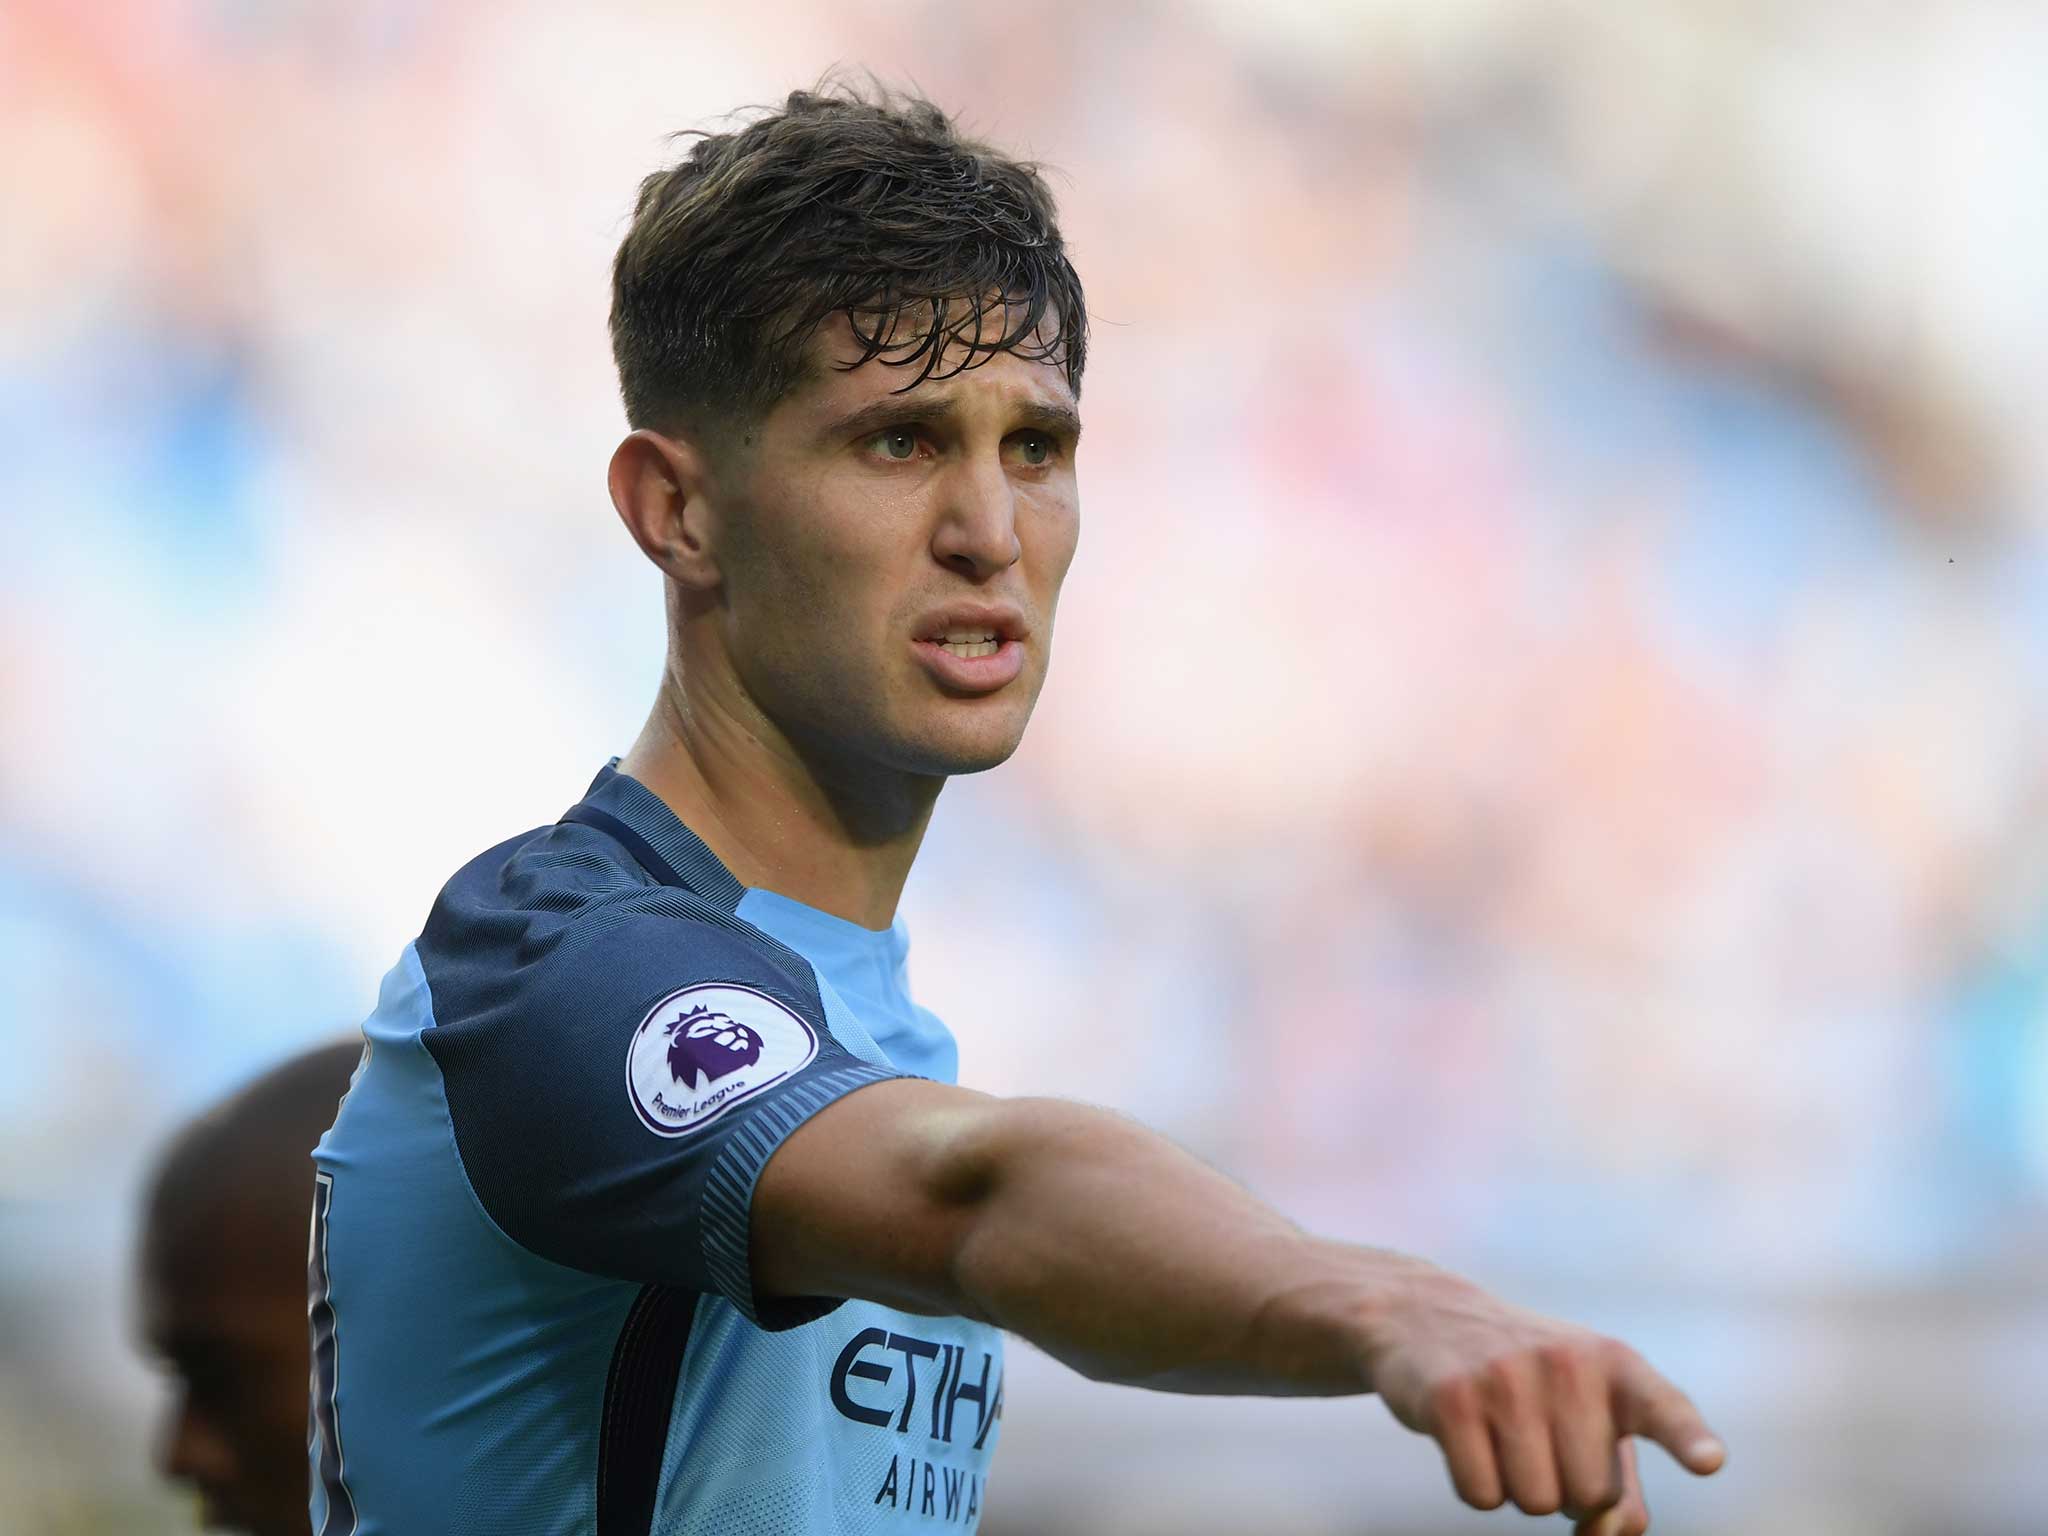 John Stones has his work cut out at Manchester City